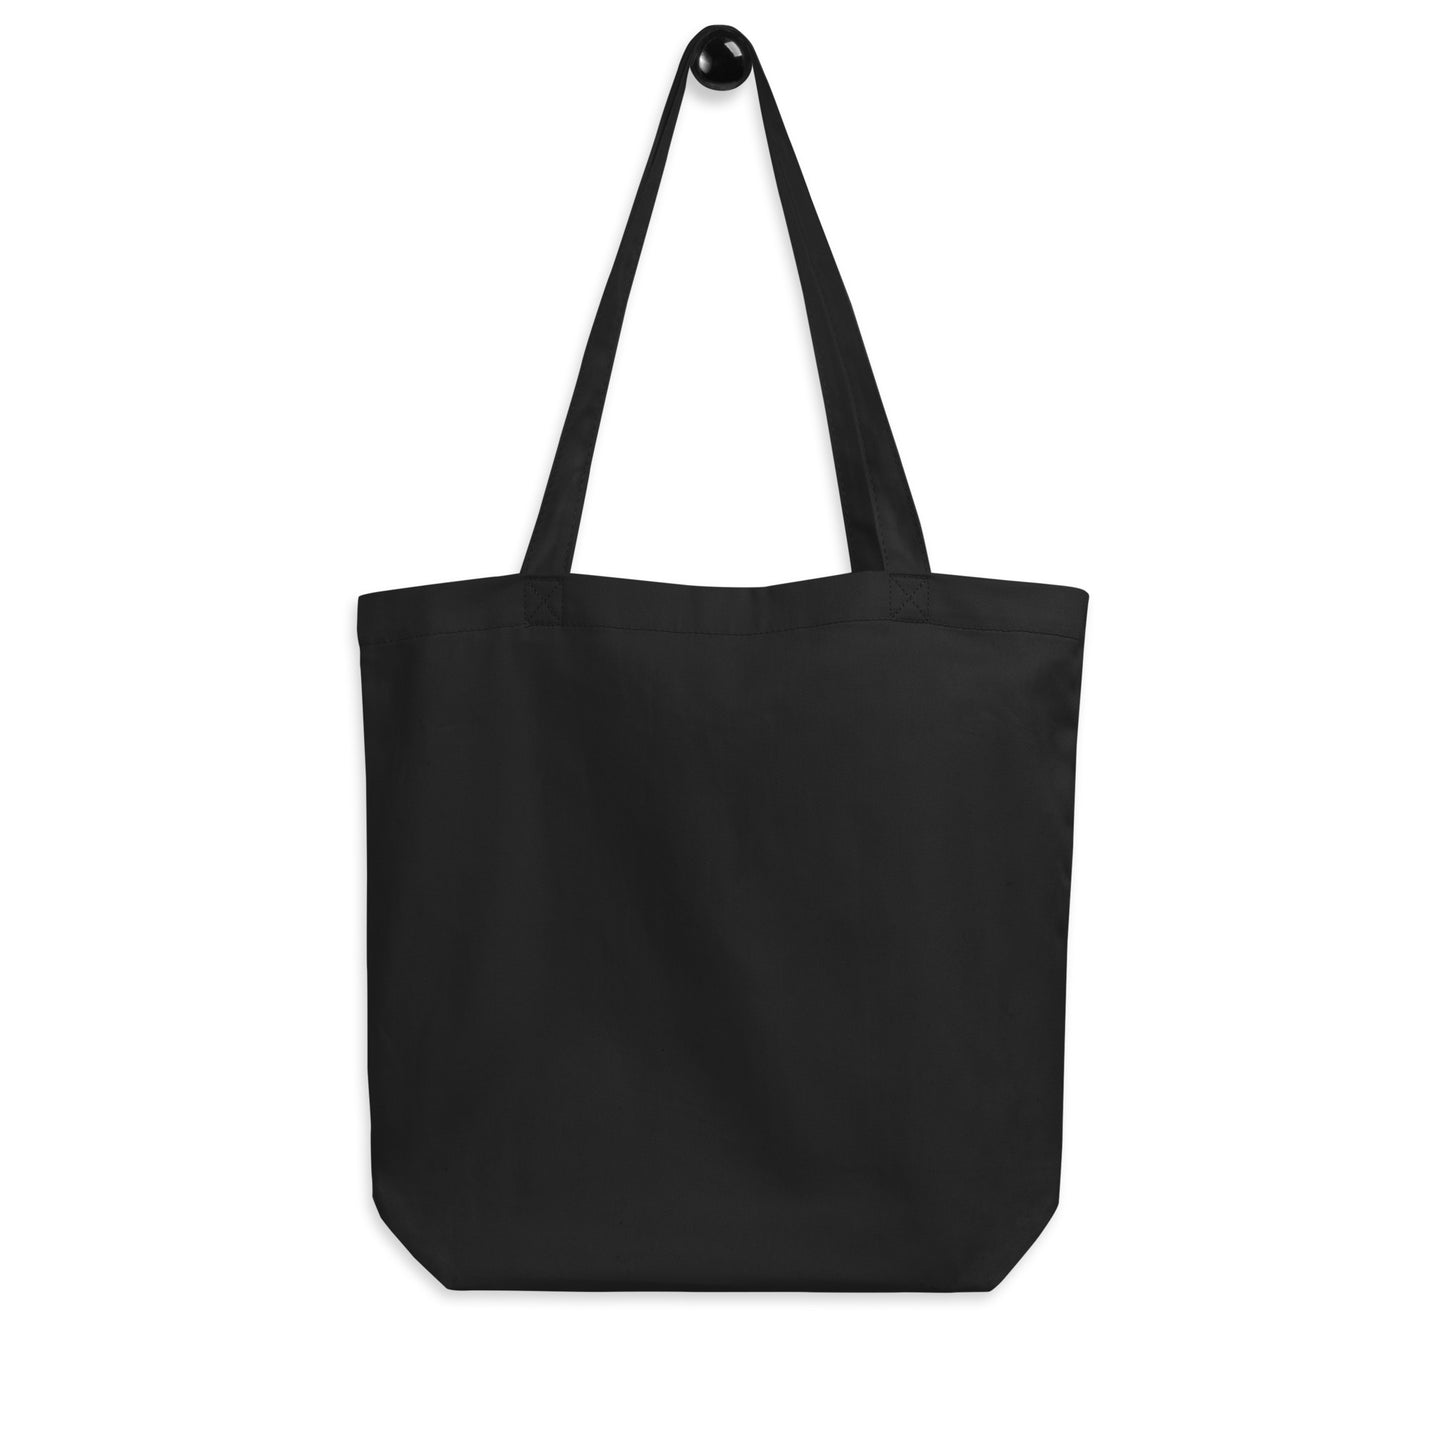 Unique Travel Gift Organic Tote - White Oval • PEK Beijing • YHM Designs - Image 05